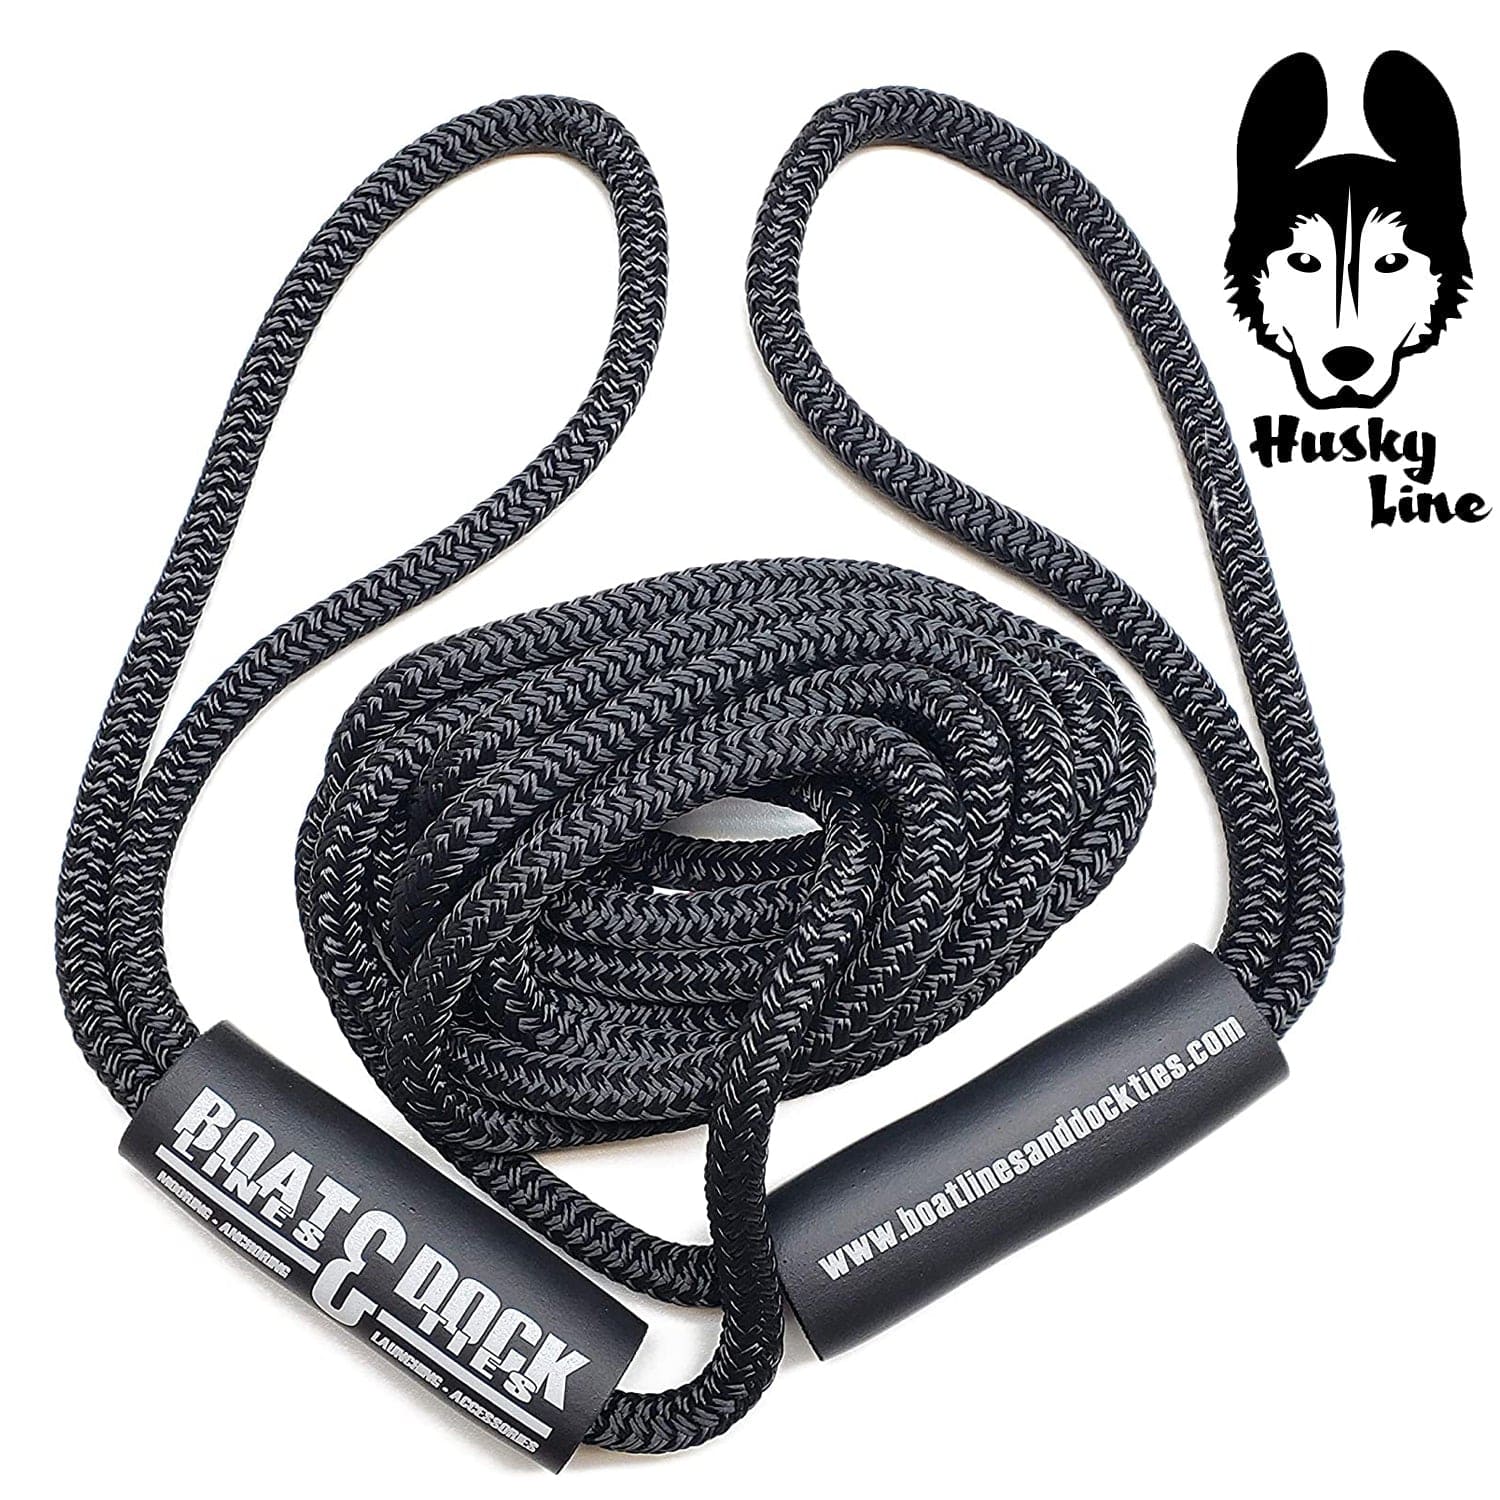 Boat Throw Rope- "Husky Line" 2 Loop Double Braided Nylon Rope, Stitched Loops and Floats - Boat Lines & Dock Ties Boat Lines & Dock Ties 10' / Black